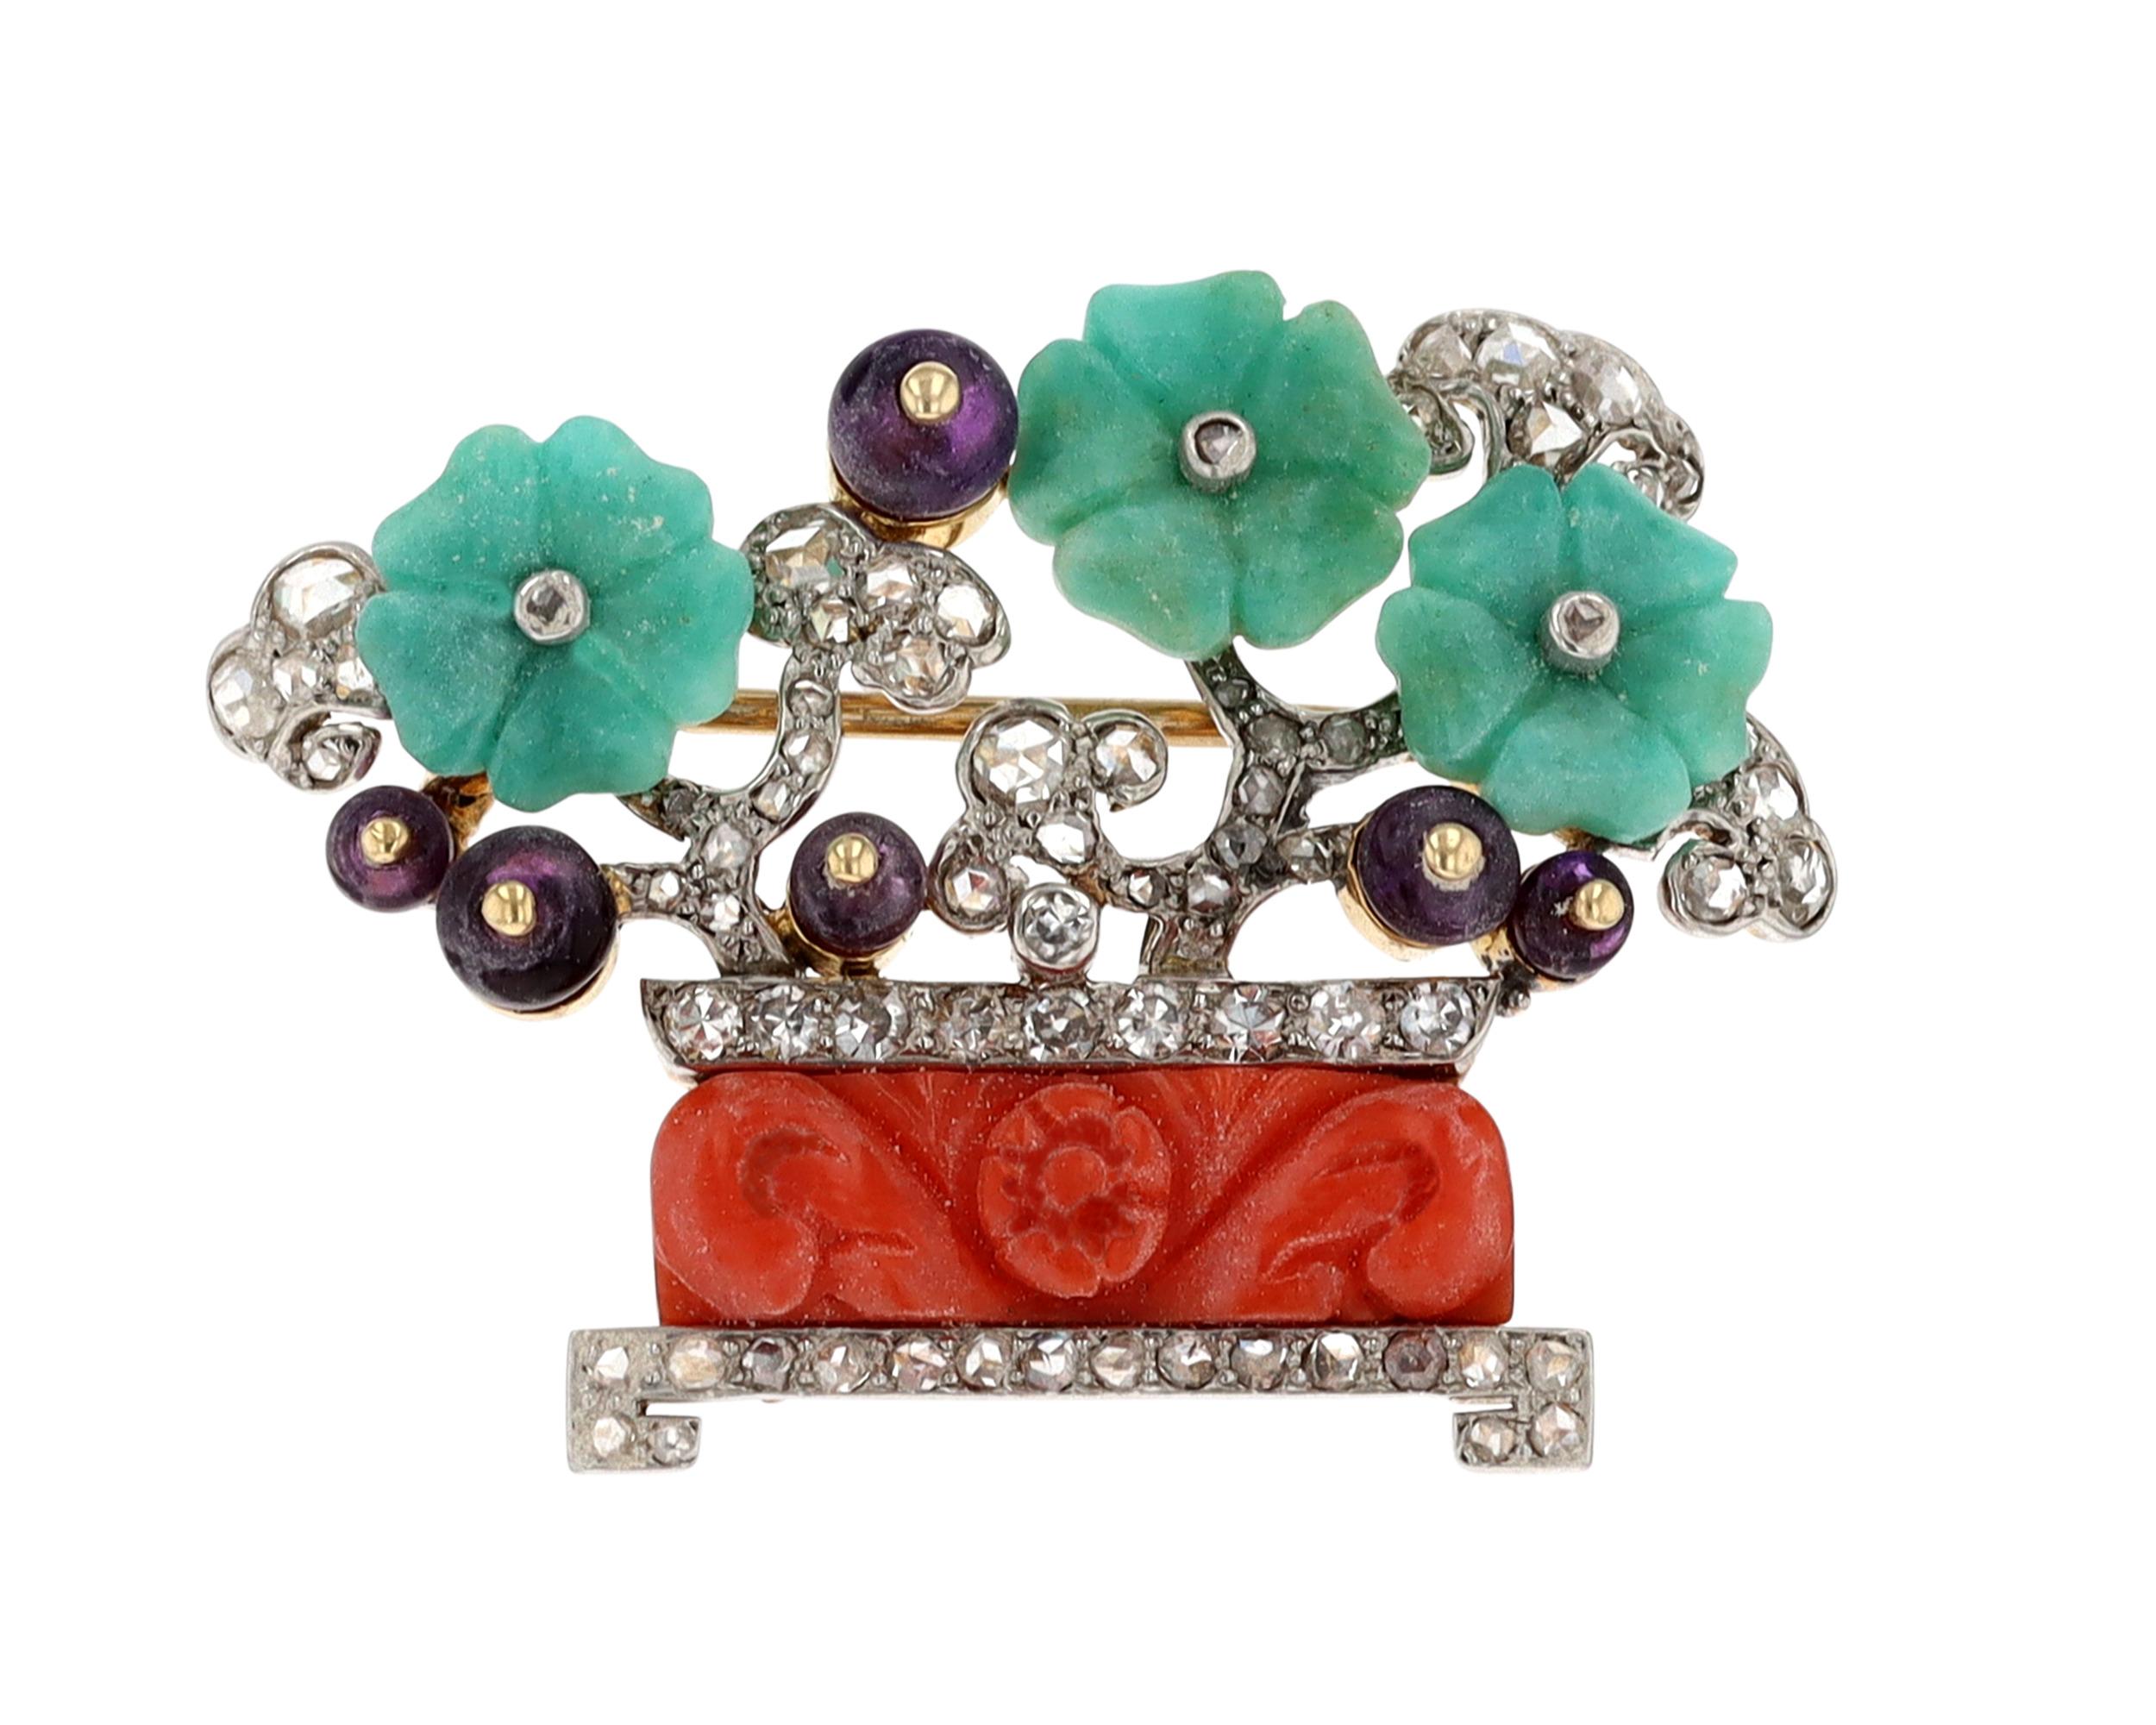 This charming Art Deco brooch crafted by the legendary Cartier takes the form of a vase holding a beautiful floral arrangement. Carved coral forms the base of the design, while carved jade and diamond accents create the blooms, lending brilliance to